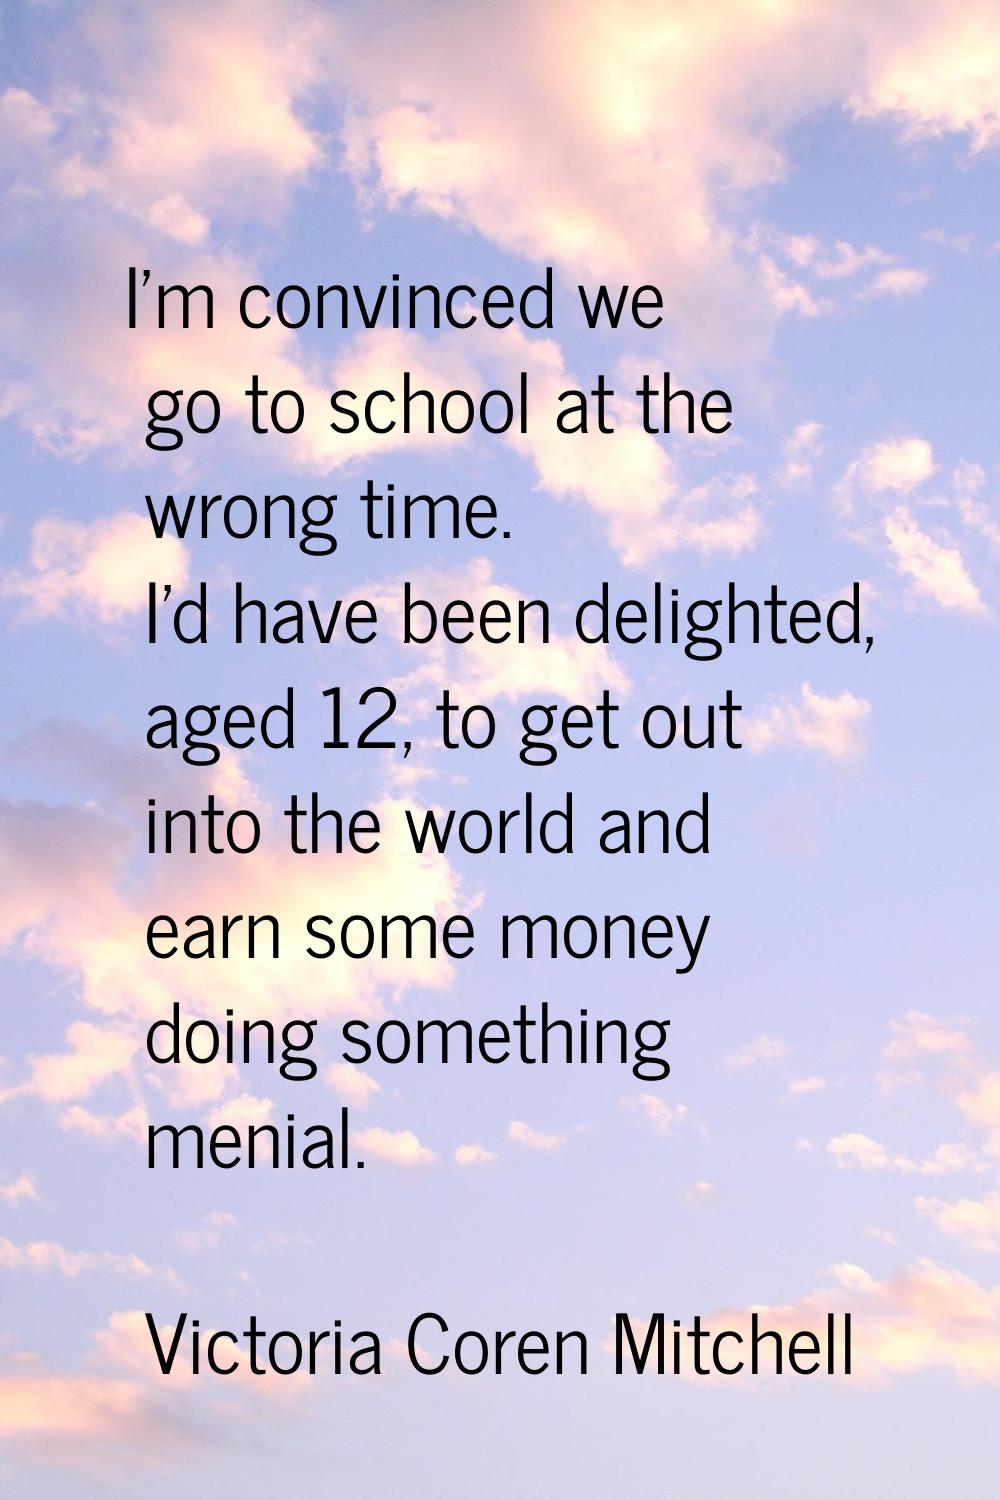 I'm convinced we go to school at the wrong time. I'd have been delighted, aged 12, to get out into 